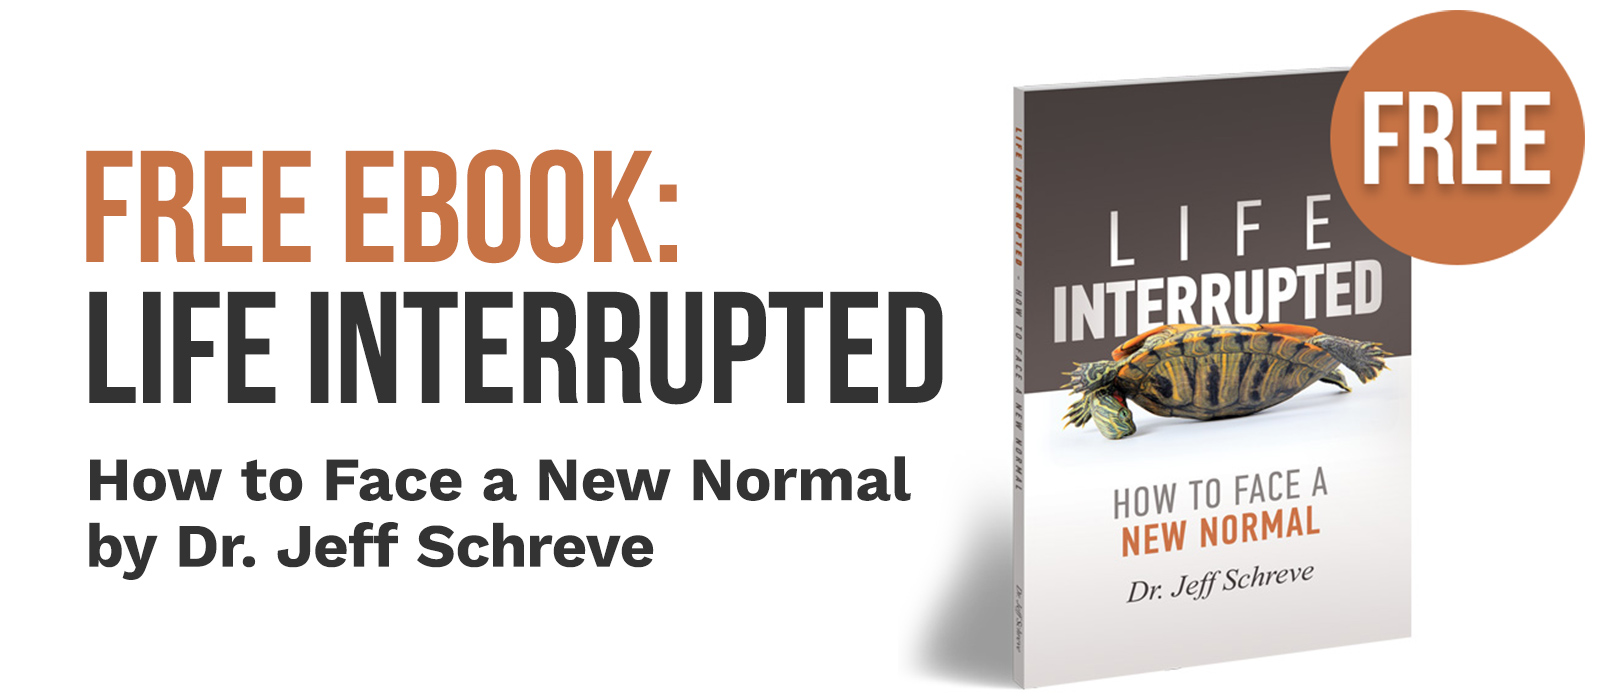 Free Book: Life Interrupted - How to Face a New Normal by Dr. Jeff Schreve